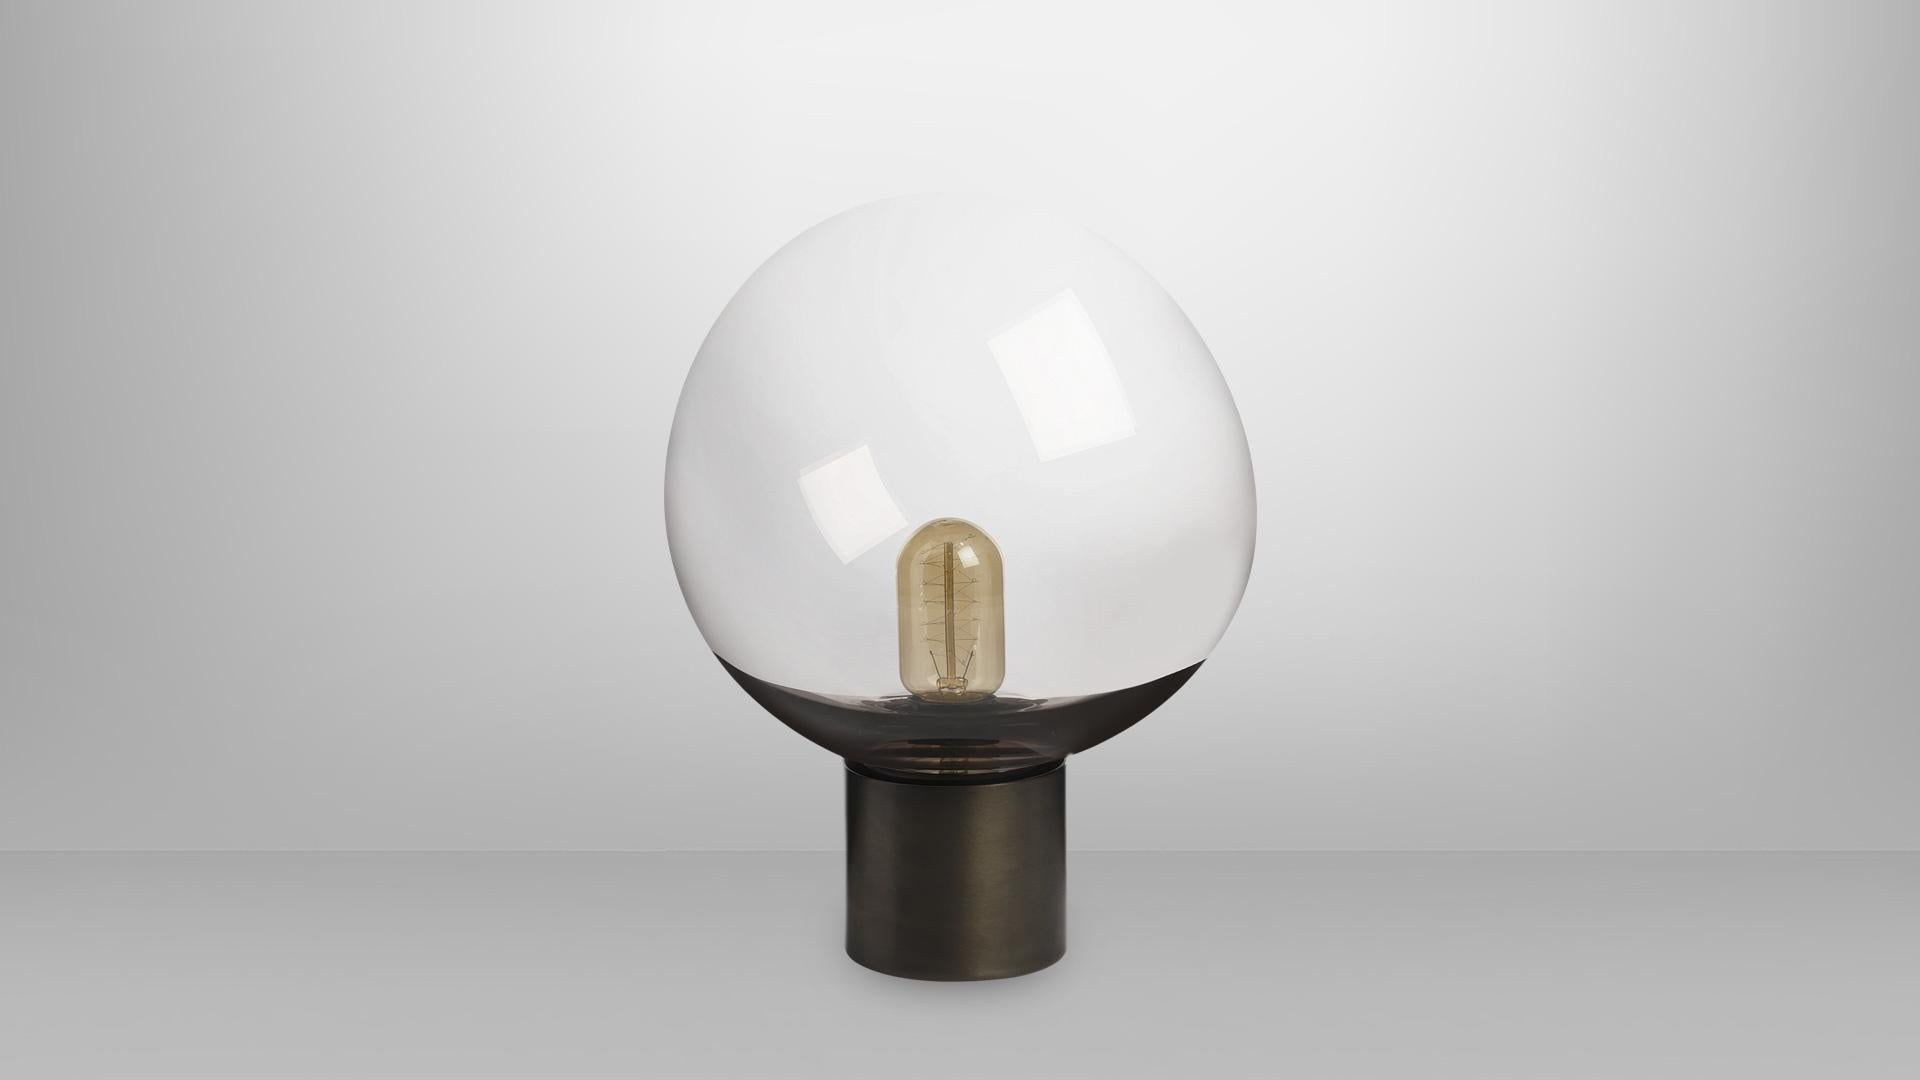 Moon table lamp by CTO Lighting
Materials: Bronze base with hand-blown bronze tinted glass shade and opal diffuser
Dimensions: 24 x H 33 cm

All our lamps can be wired according to each country. If sold to the USA it will be wired for the USA for